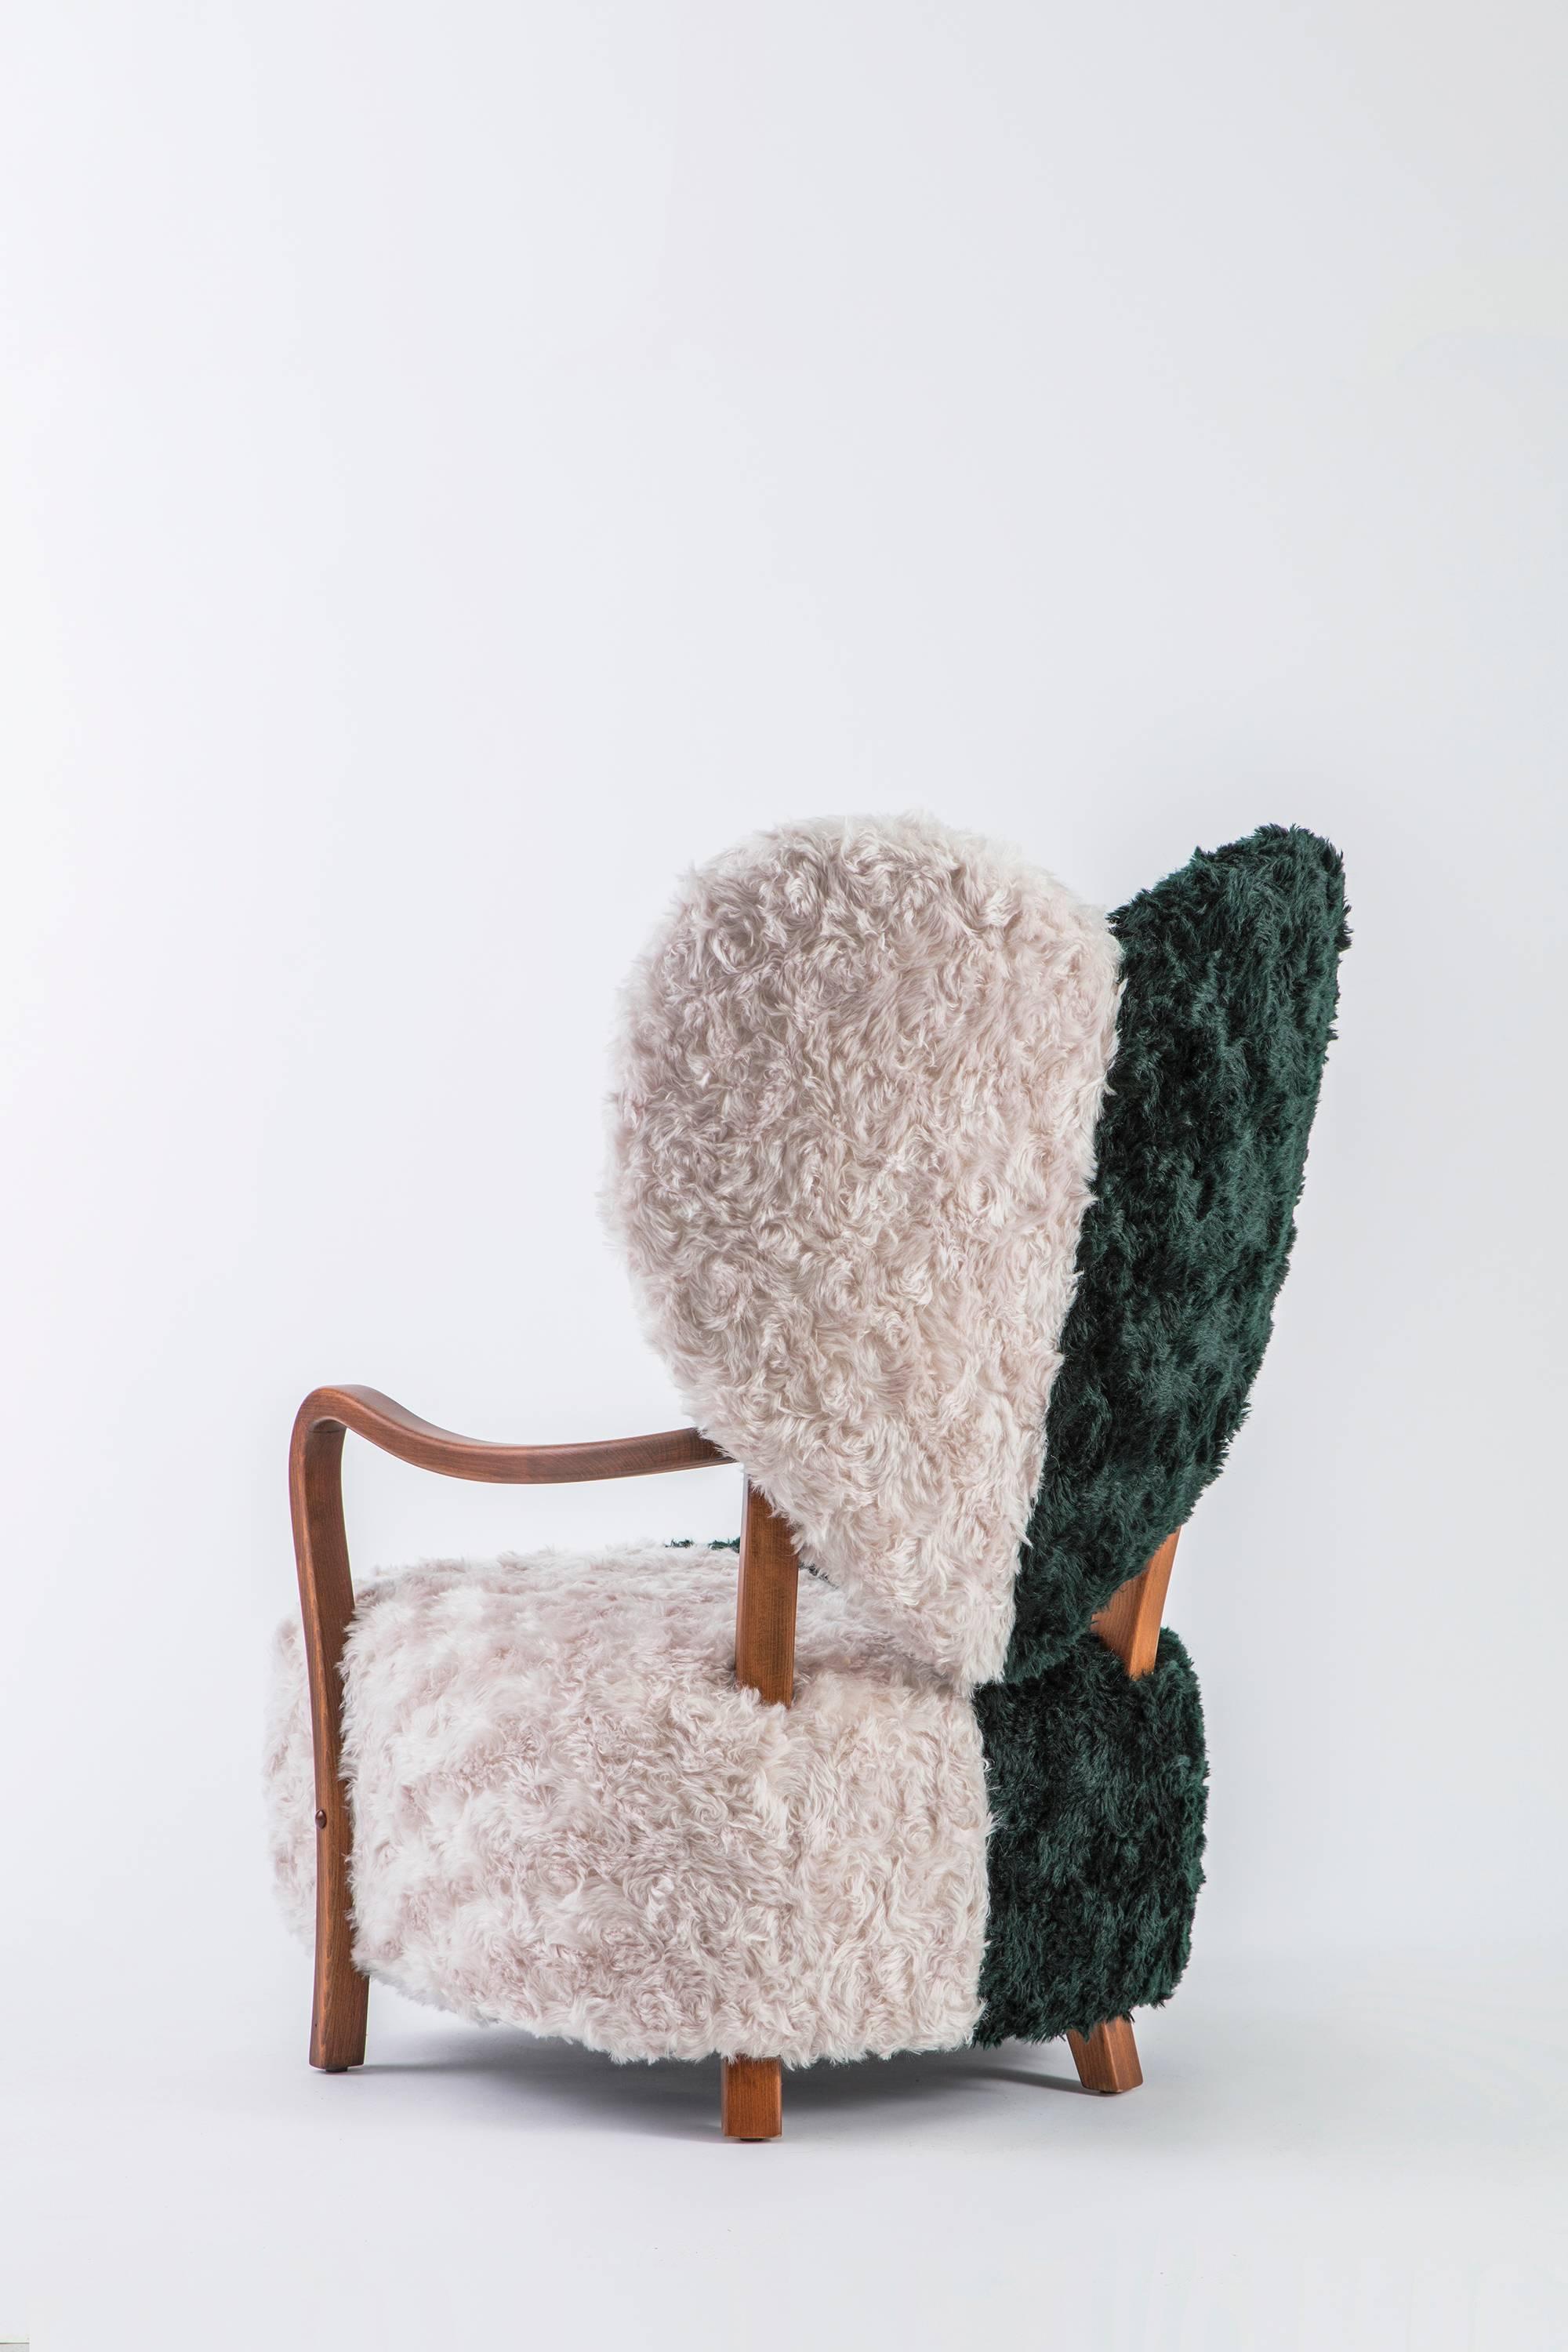 Turkish Contemporary Beechwood Uni Armchair with Heart Shaped Back and Mohair Upholstery For Sale